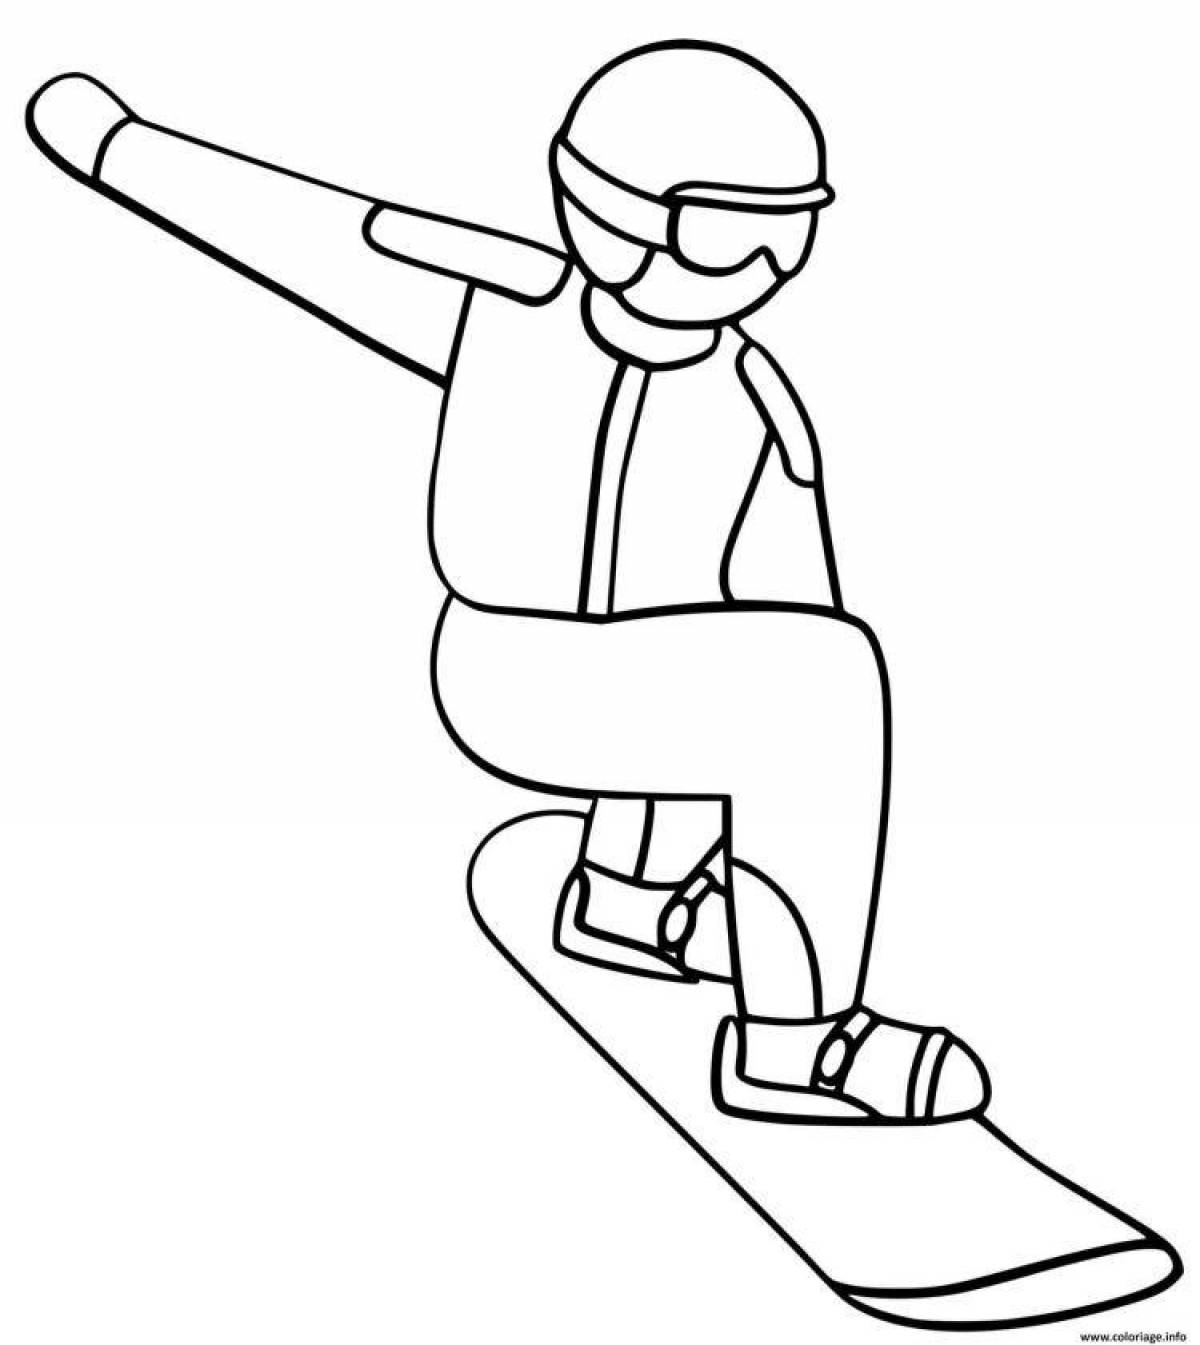 Glowing winter sports coloring book